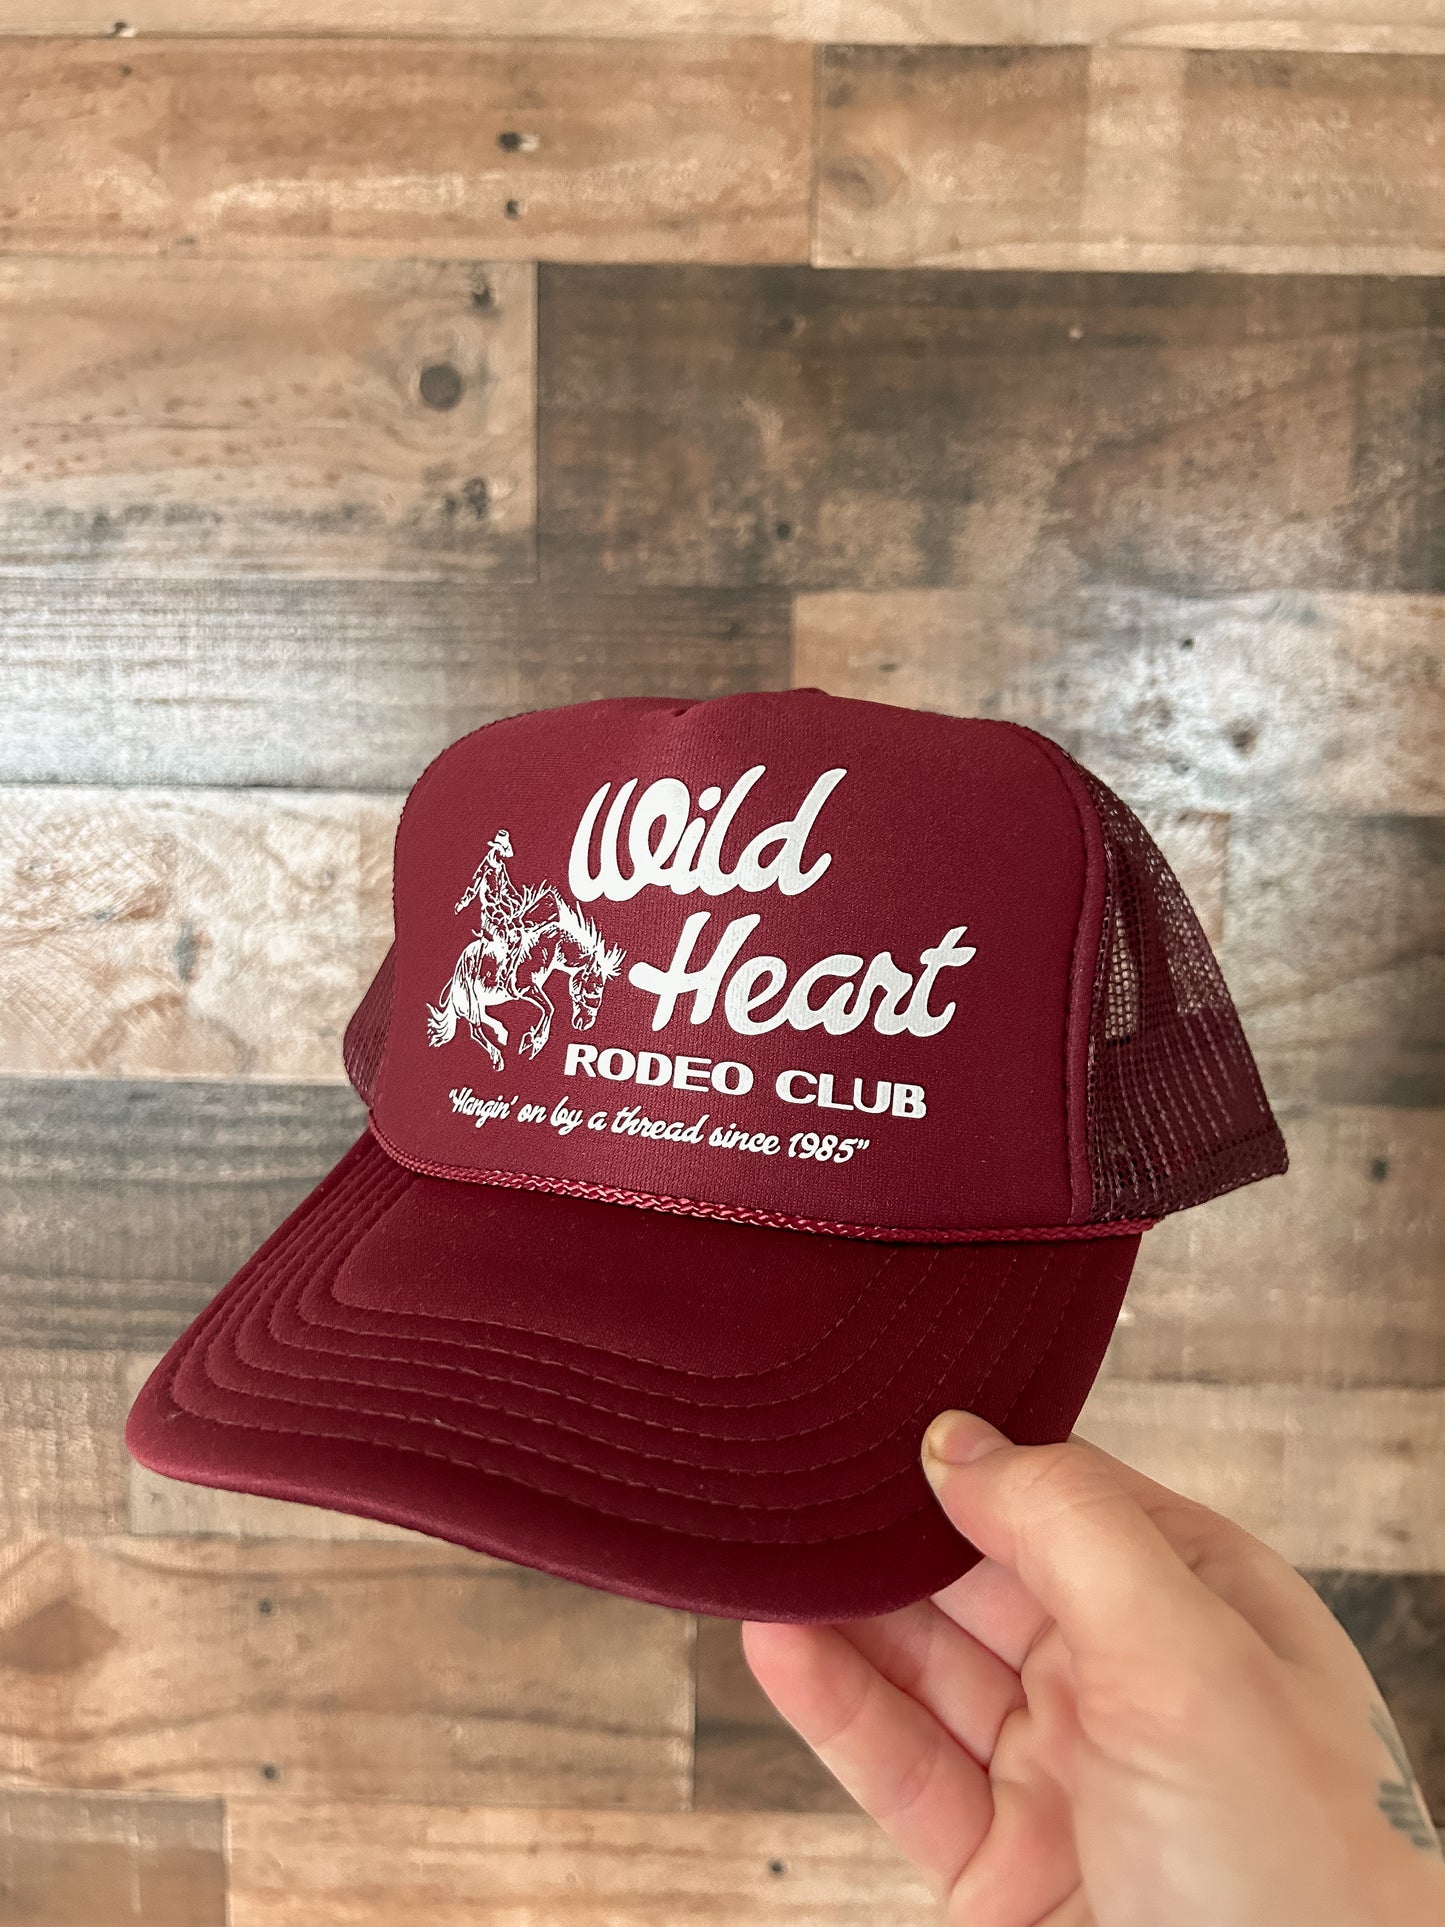 The Rodeo Club Hat in Maroon